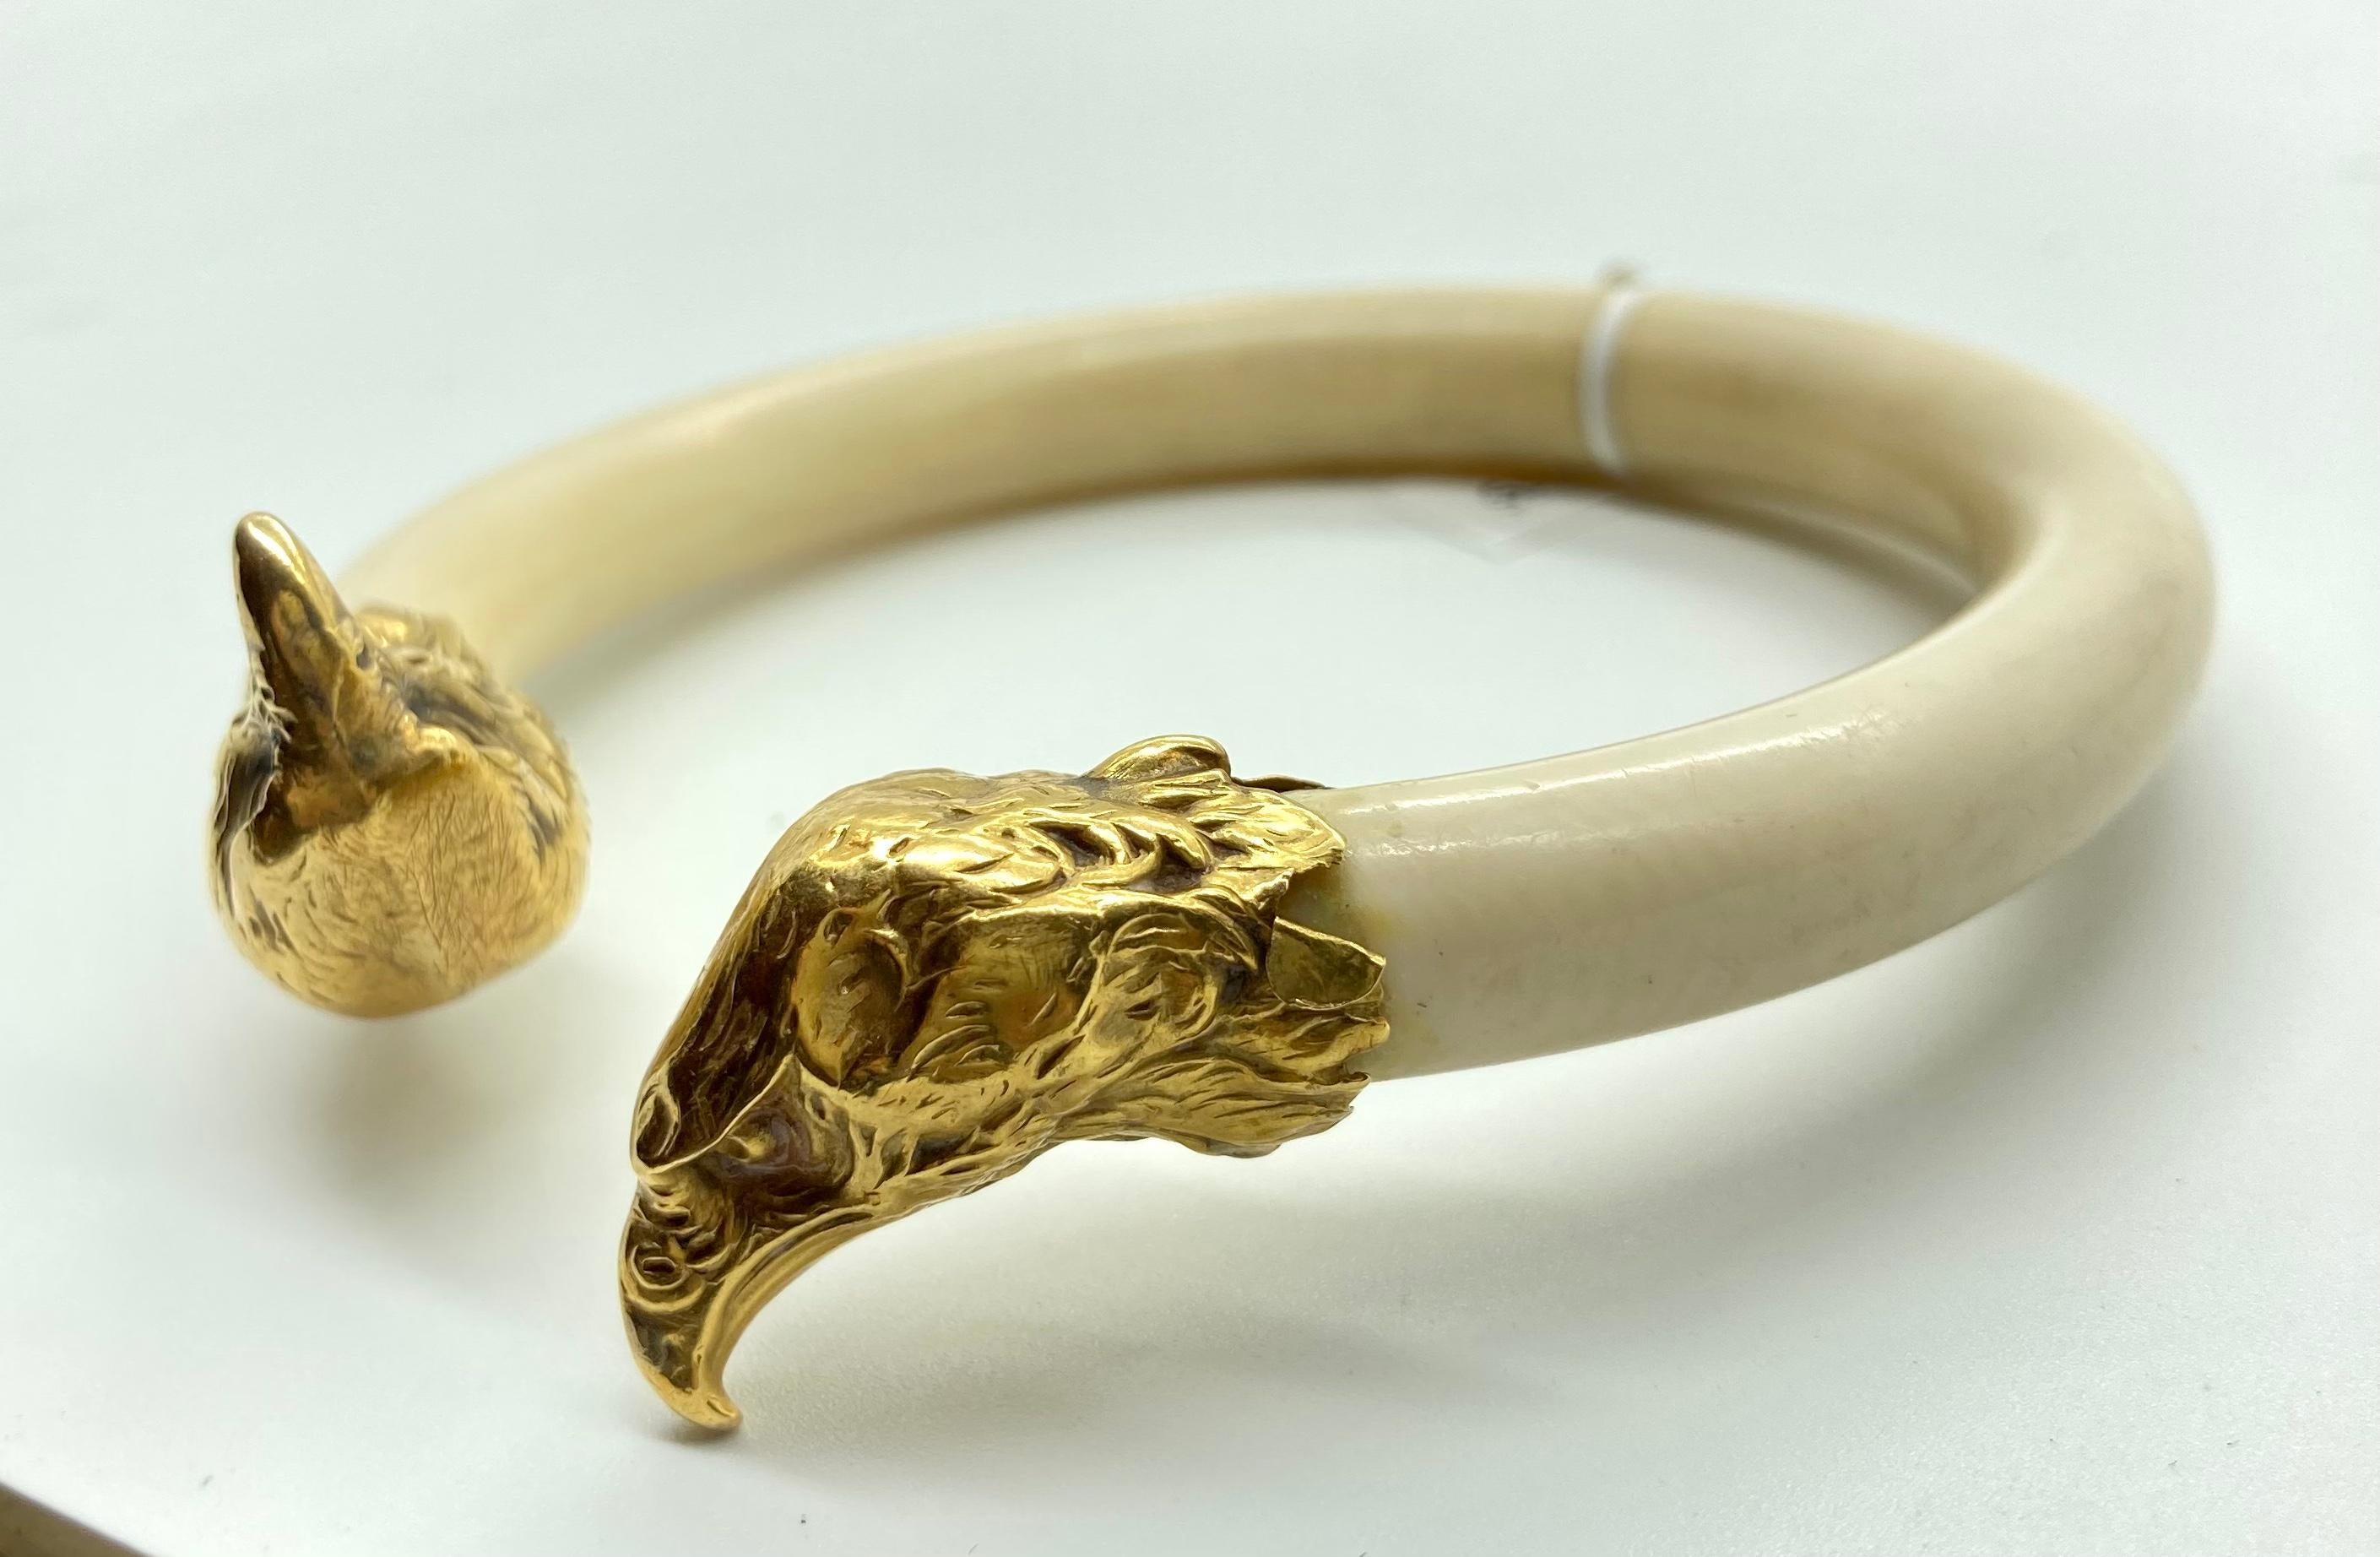 A chic old bone and 18 karat yellow gold eagle bangle bracelet. Made in France, circa 1950.